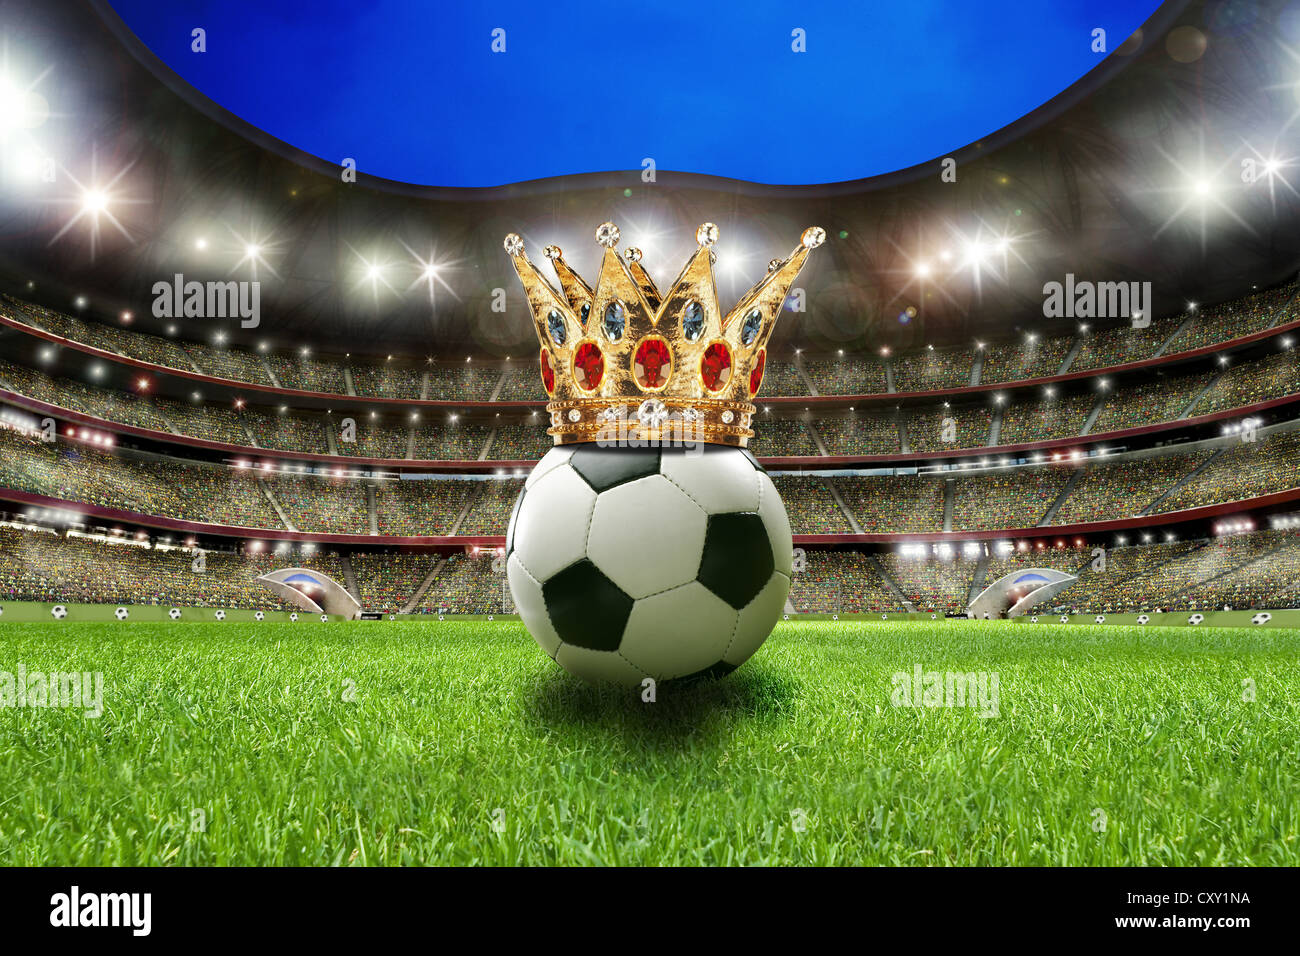 Football with a crown in a football stadium, illustration Stock Photo